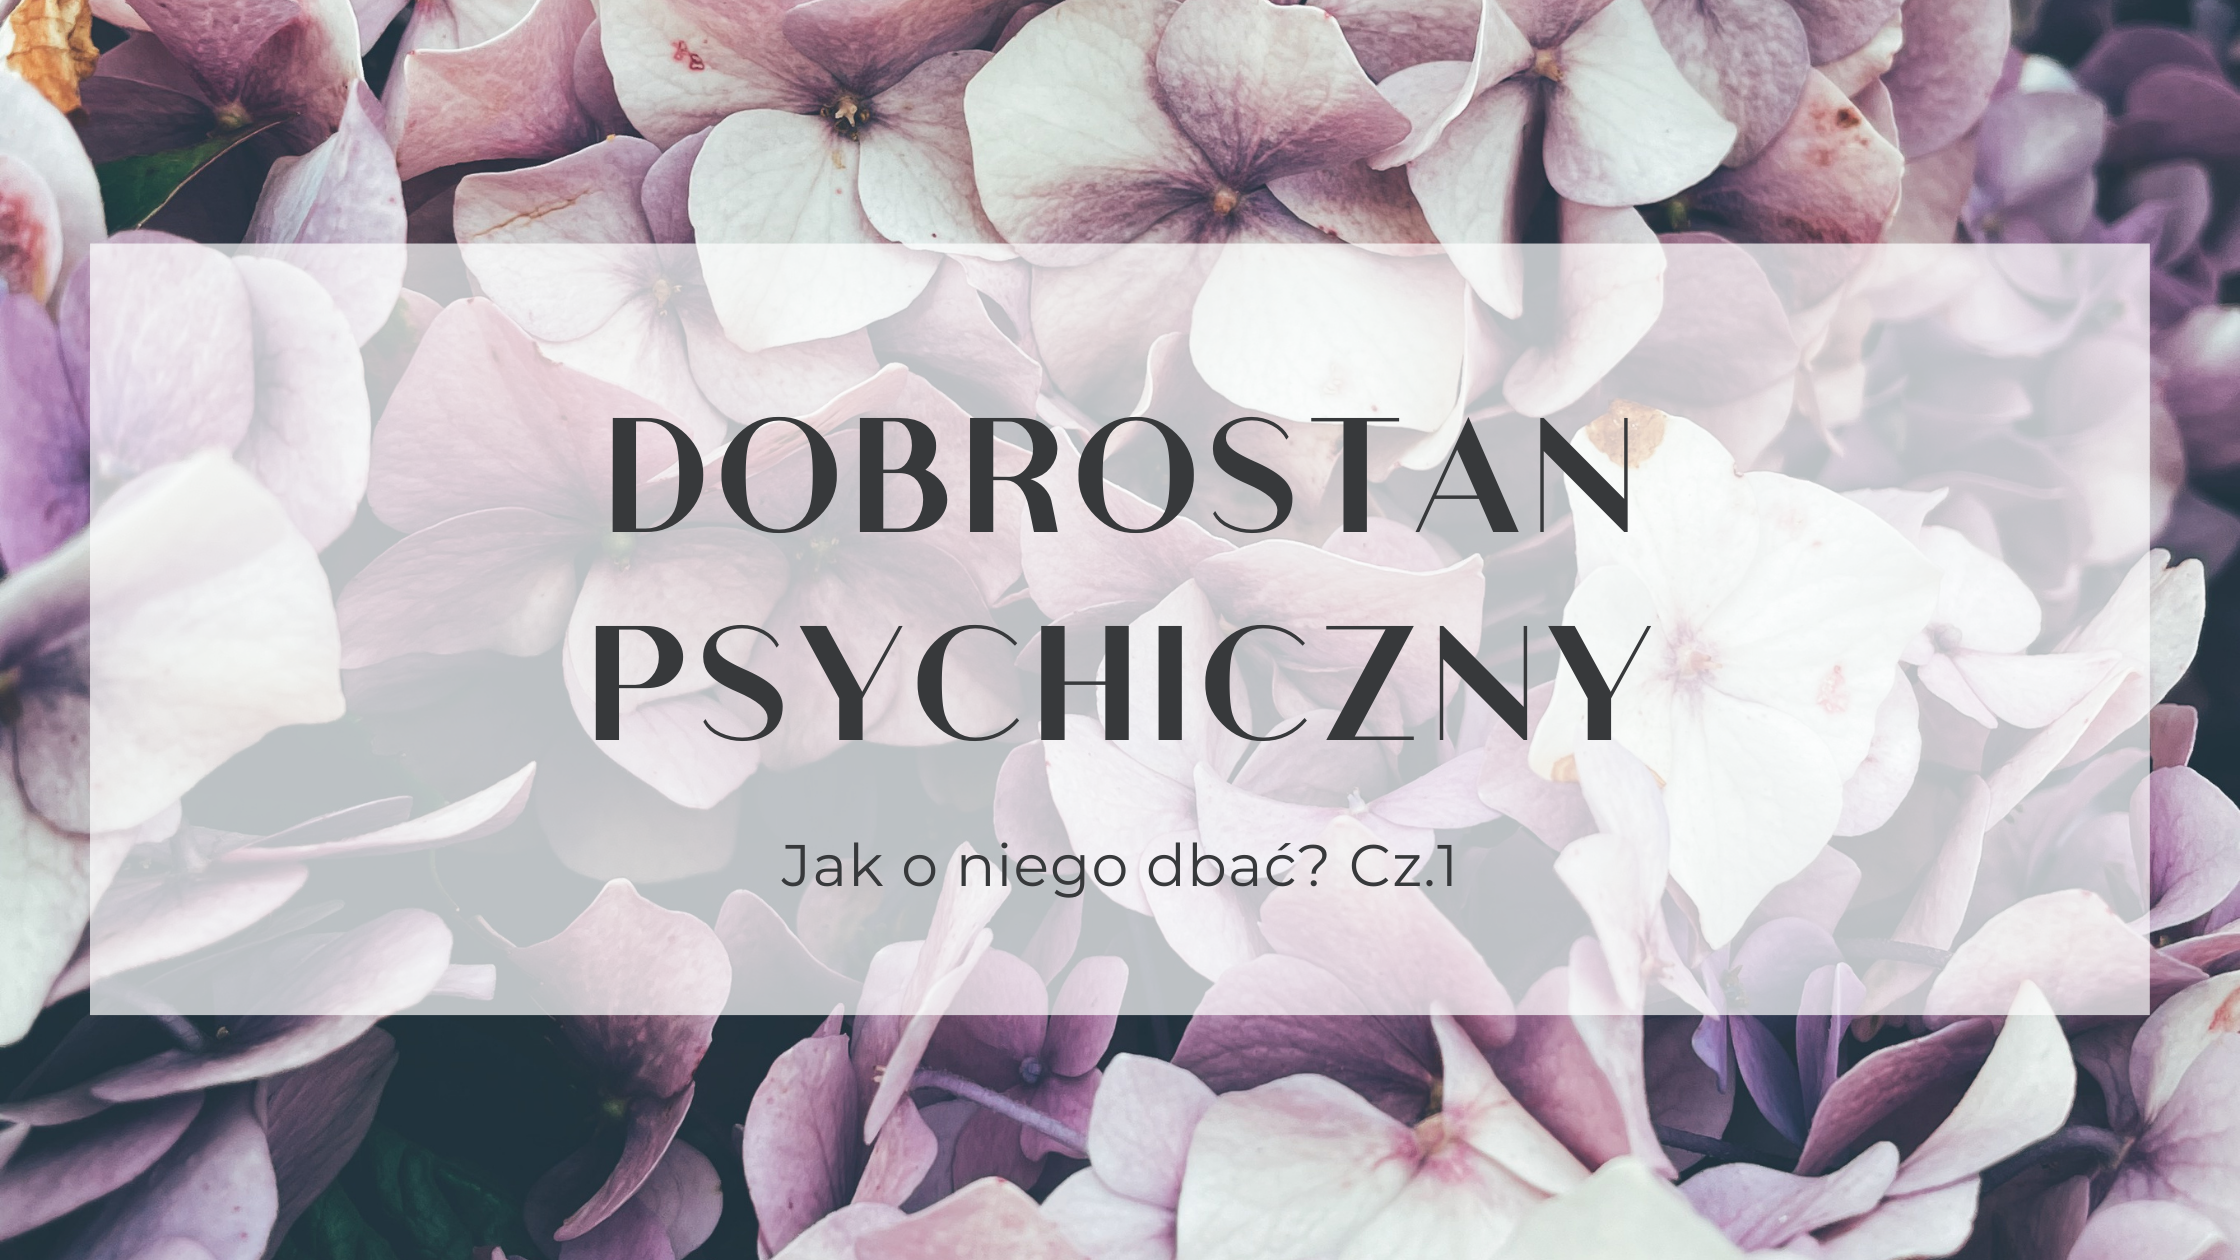 You are currently viewing Dobrostan Psychiczny